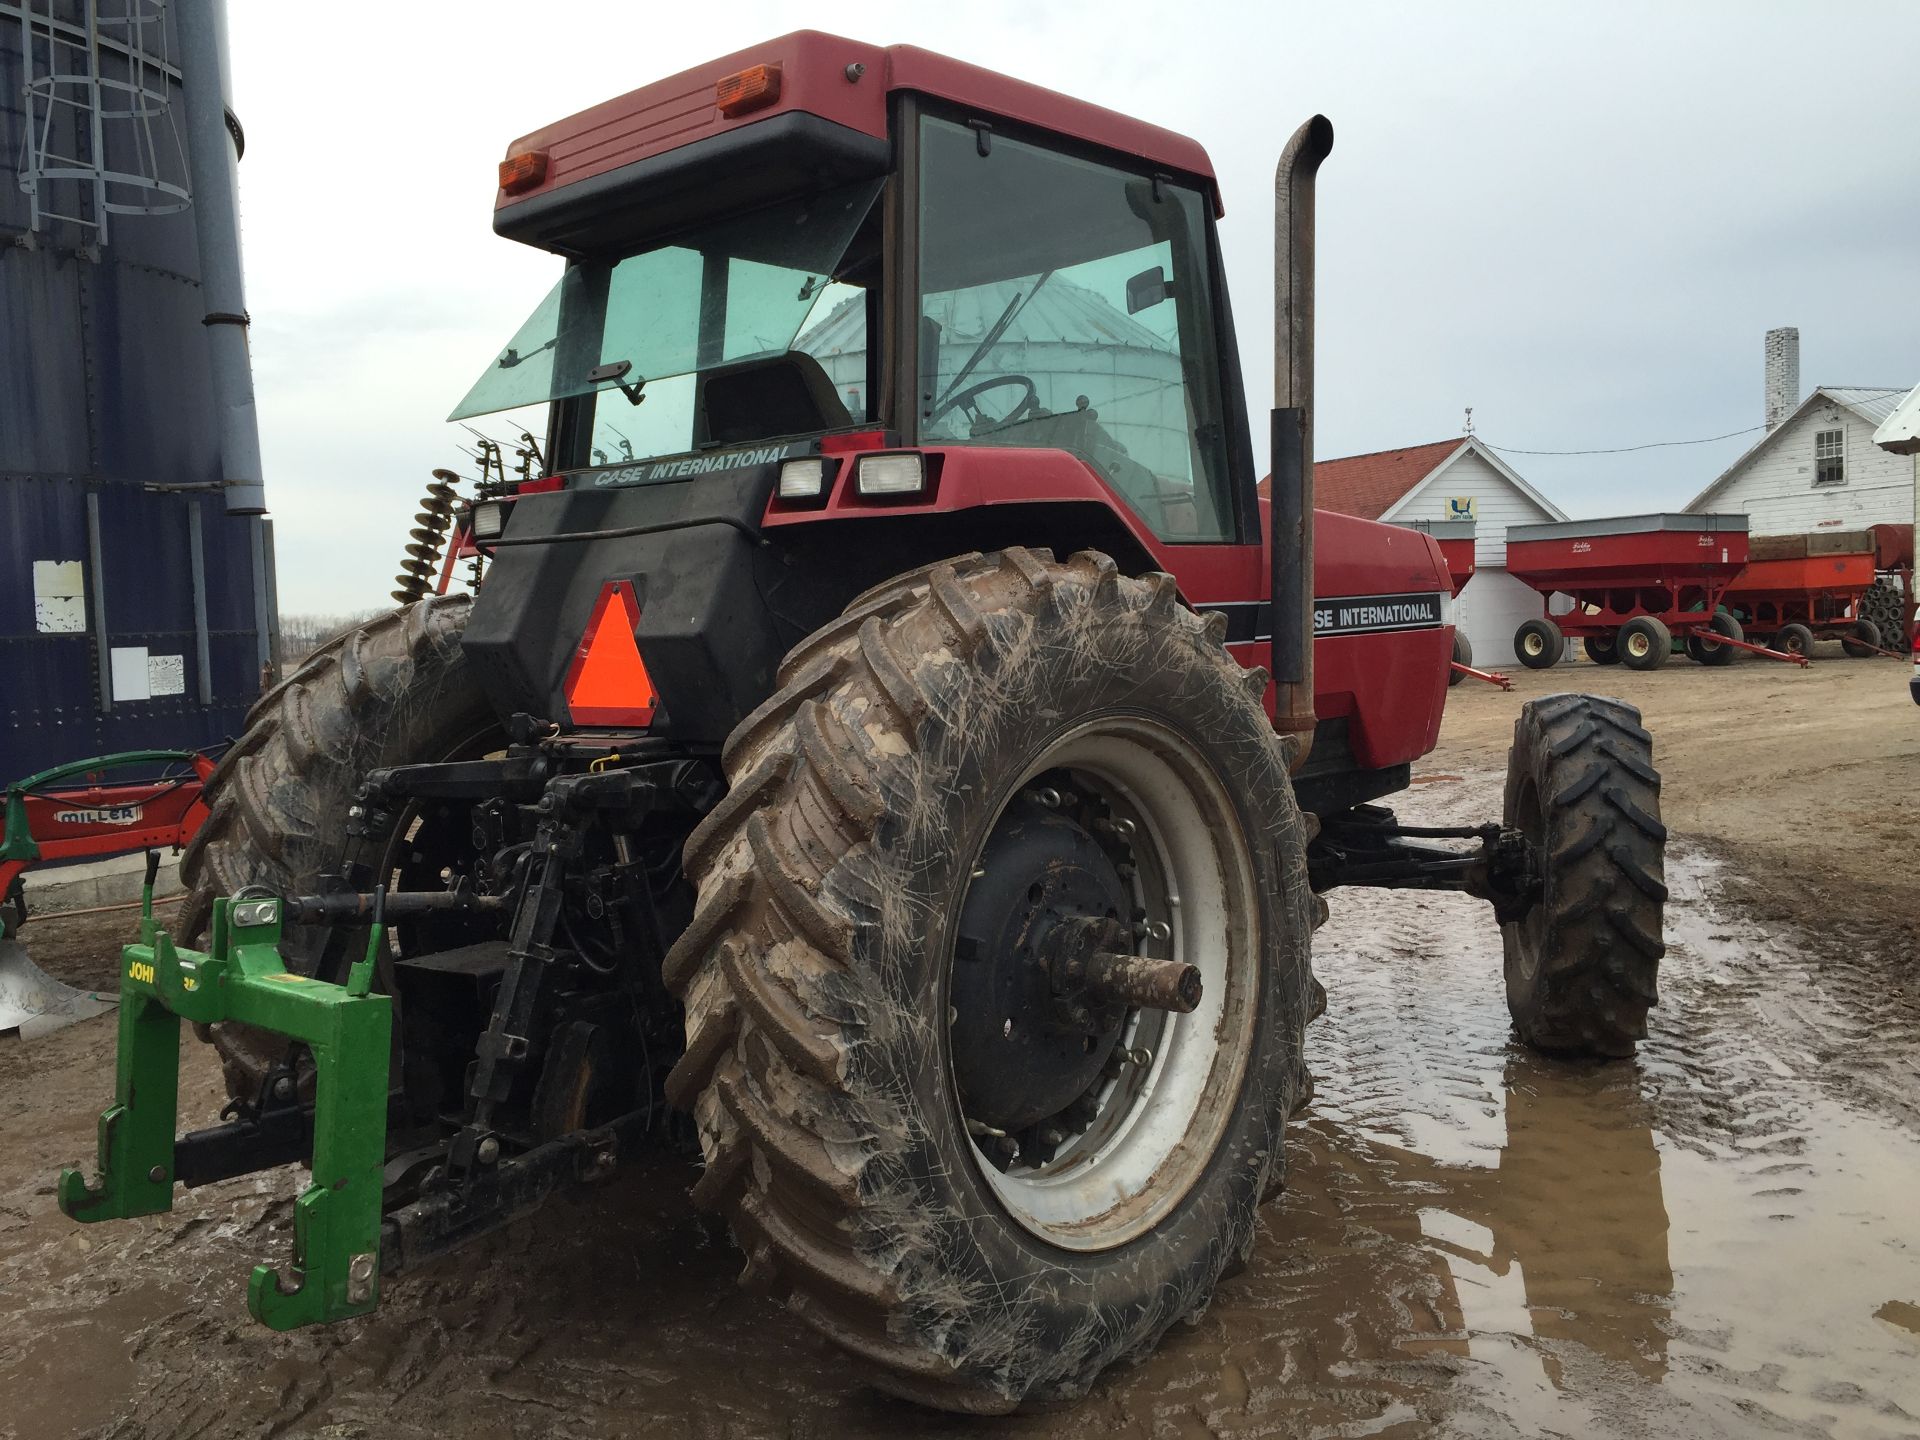 7120 Case International 4x4 Tractor ~7100hrs - not sold w/ quick hitch pictured - Image 3 of 22